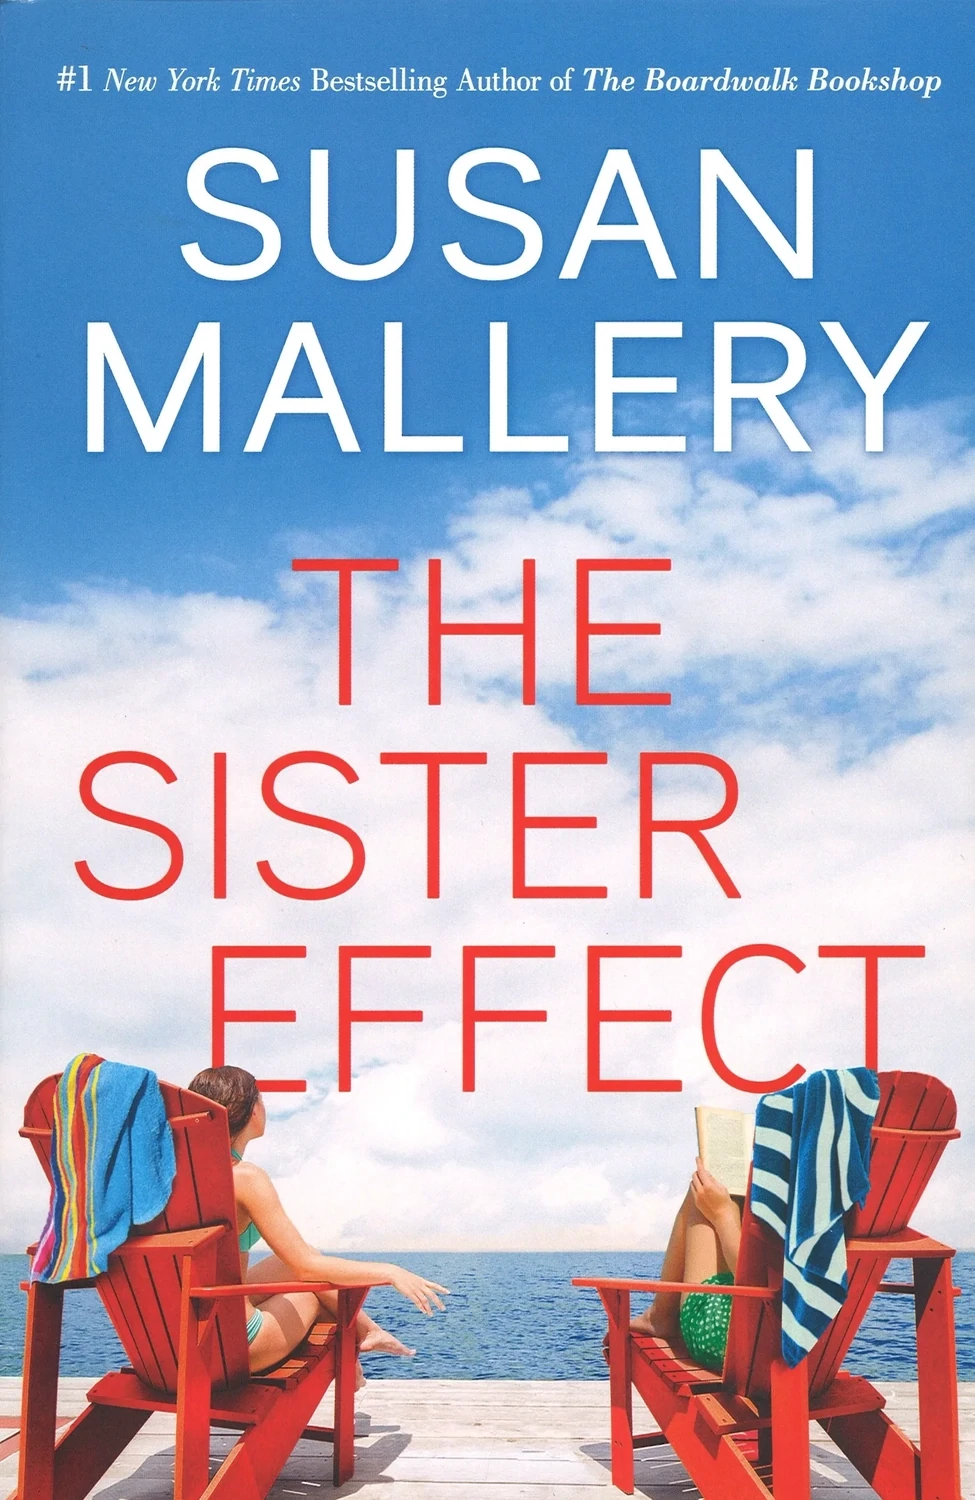 The Sister Effect by Susan Mallery